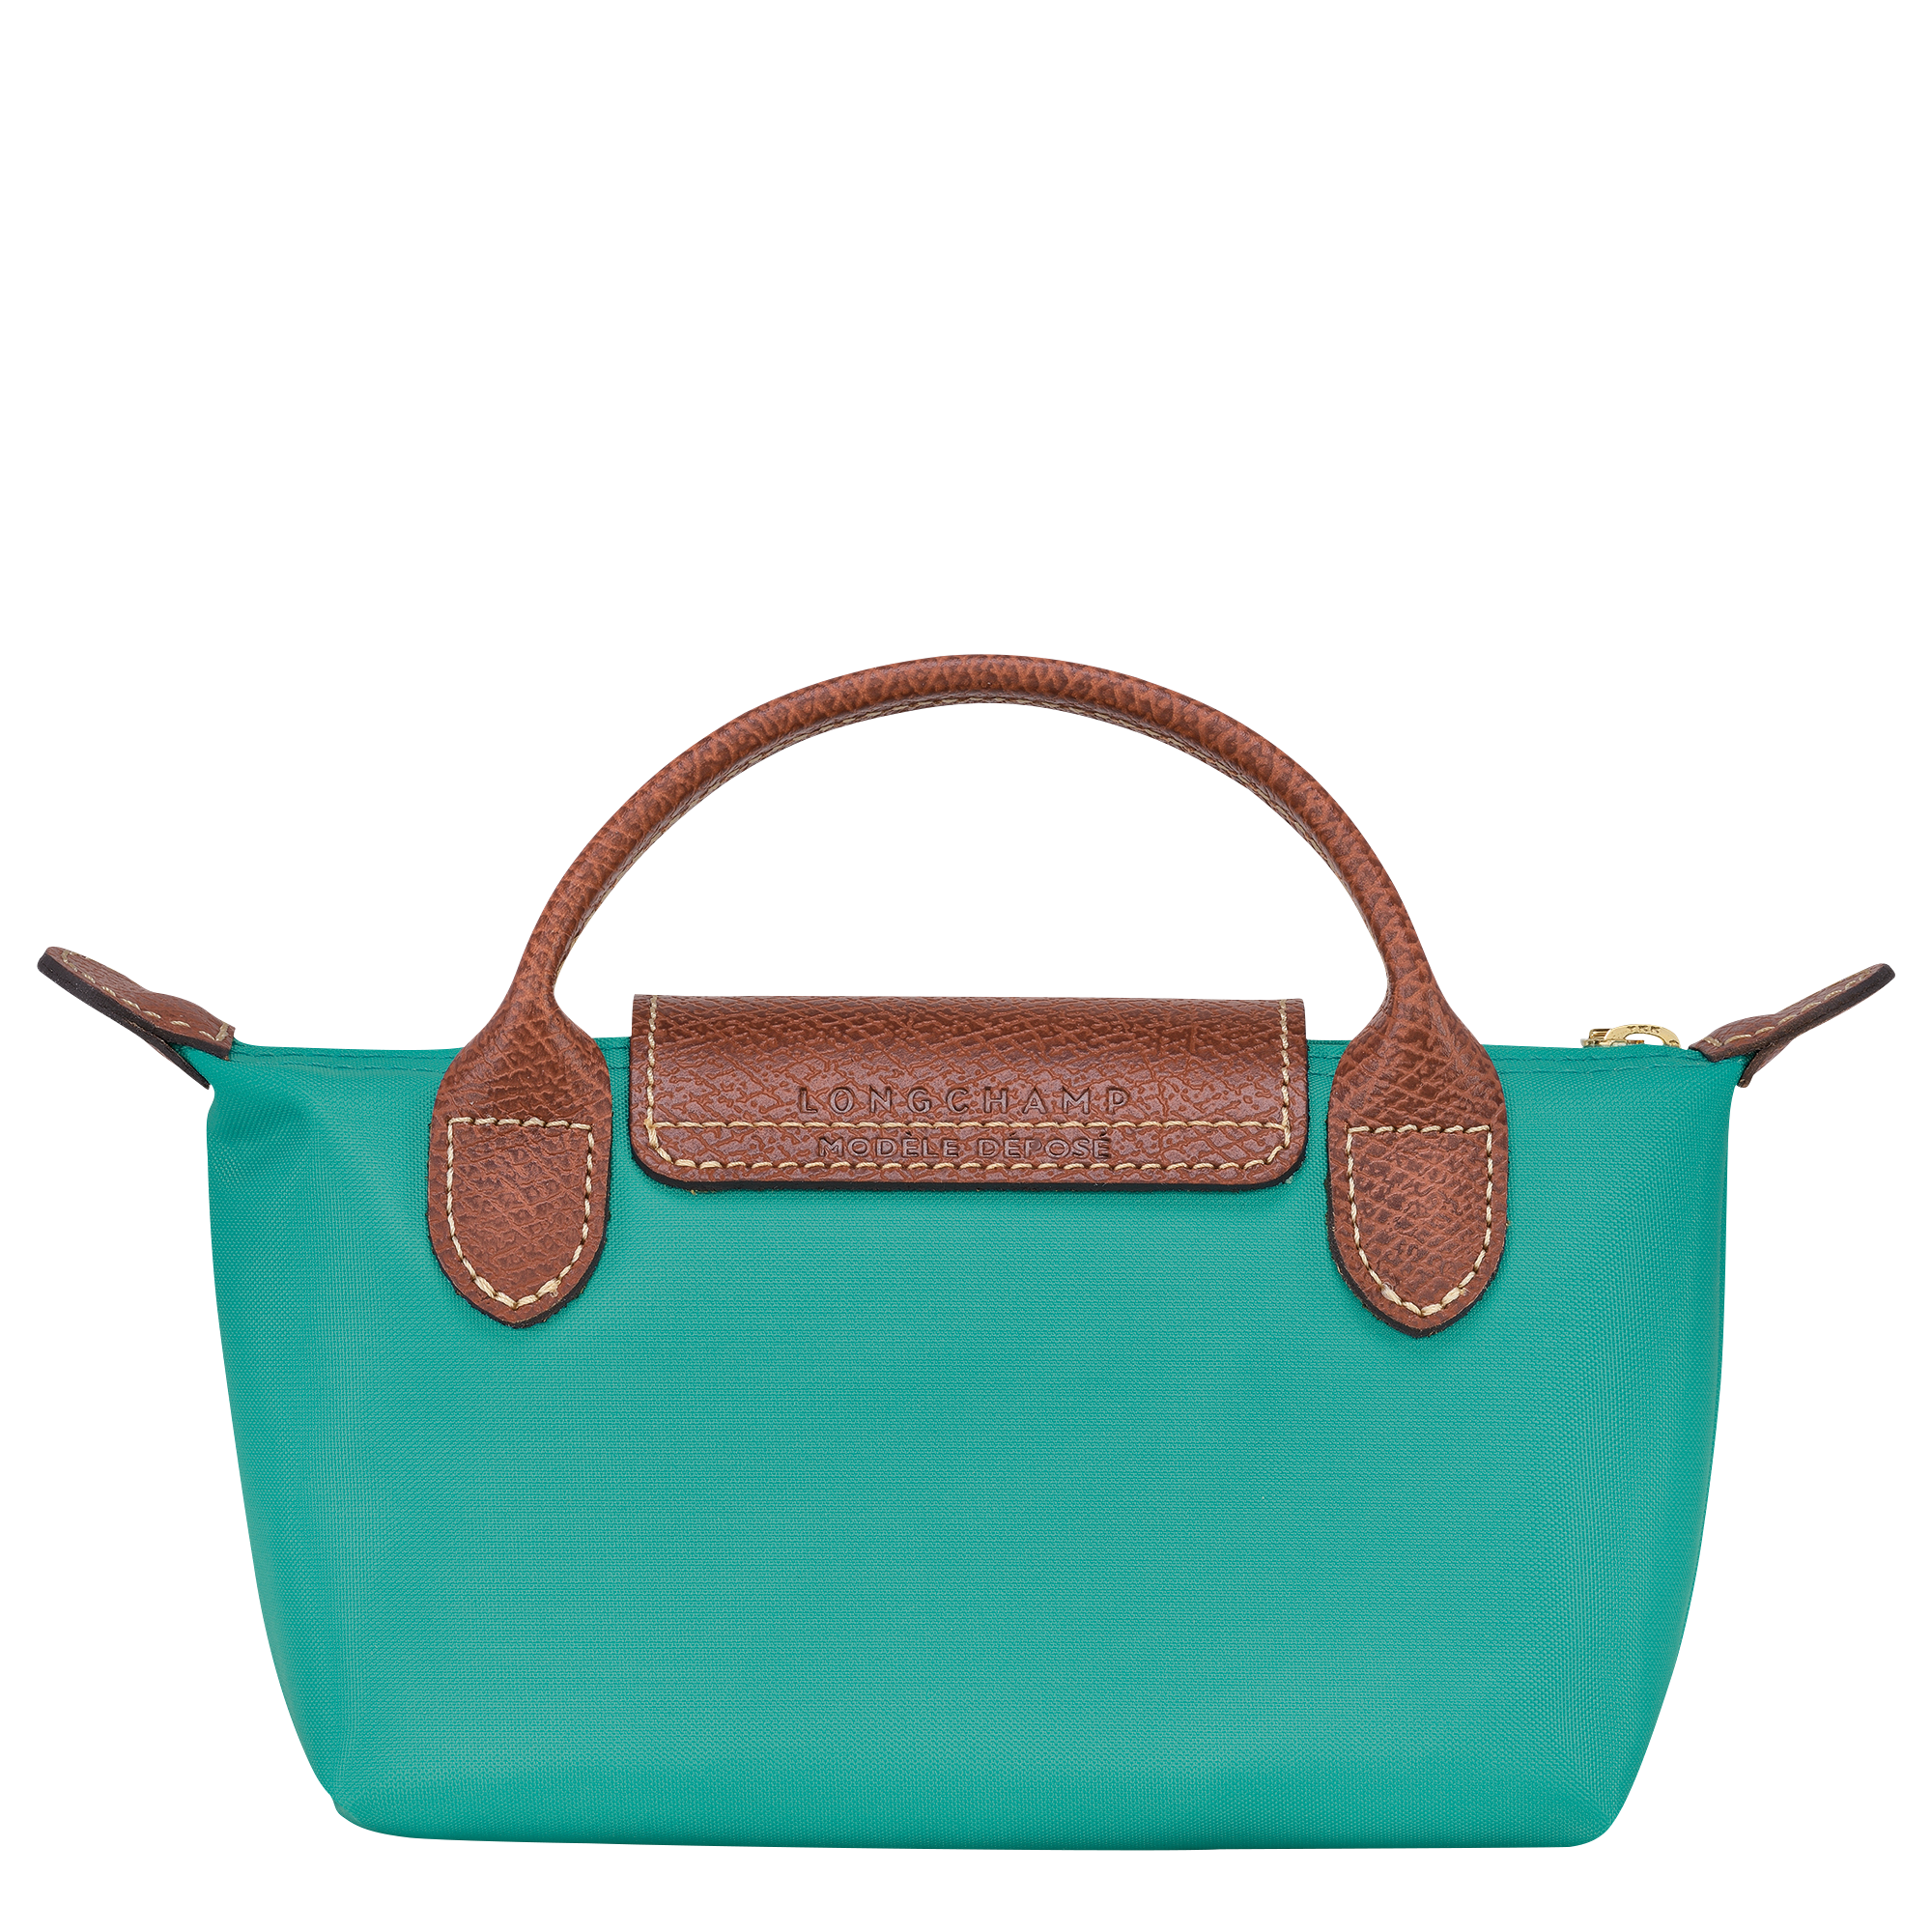 Le Pliage Original Pouch with handle, Turquoise